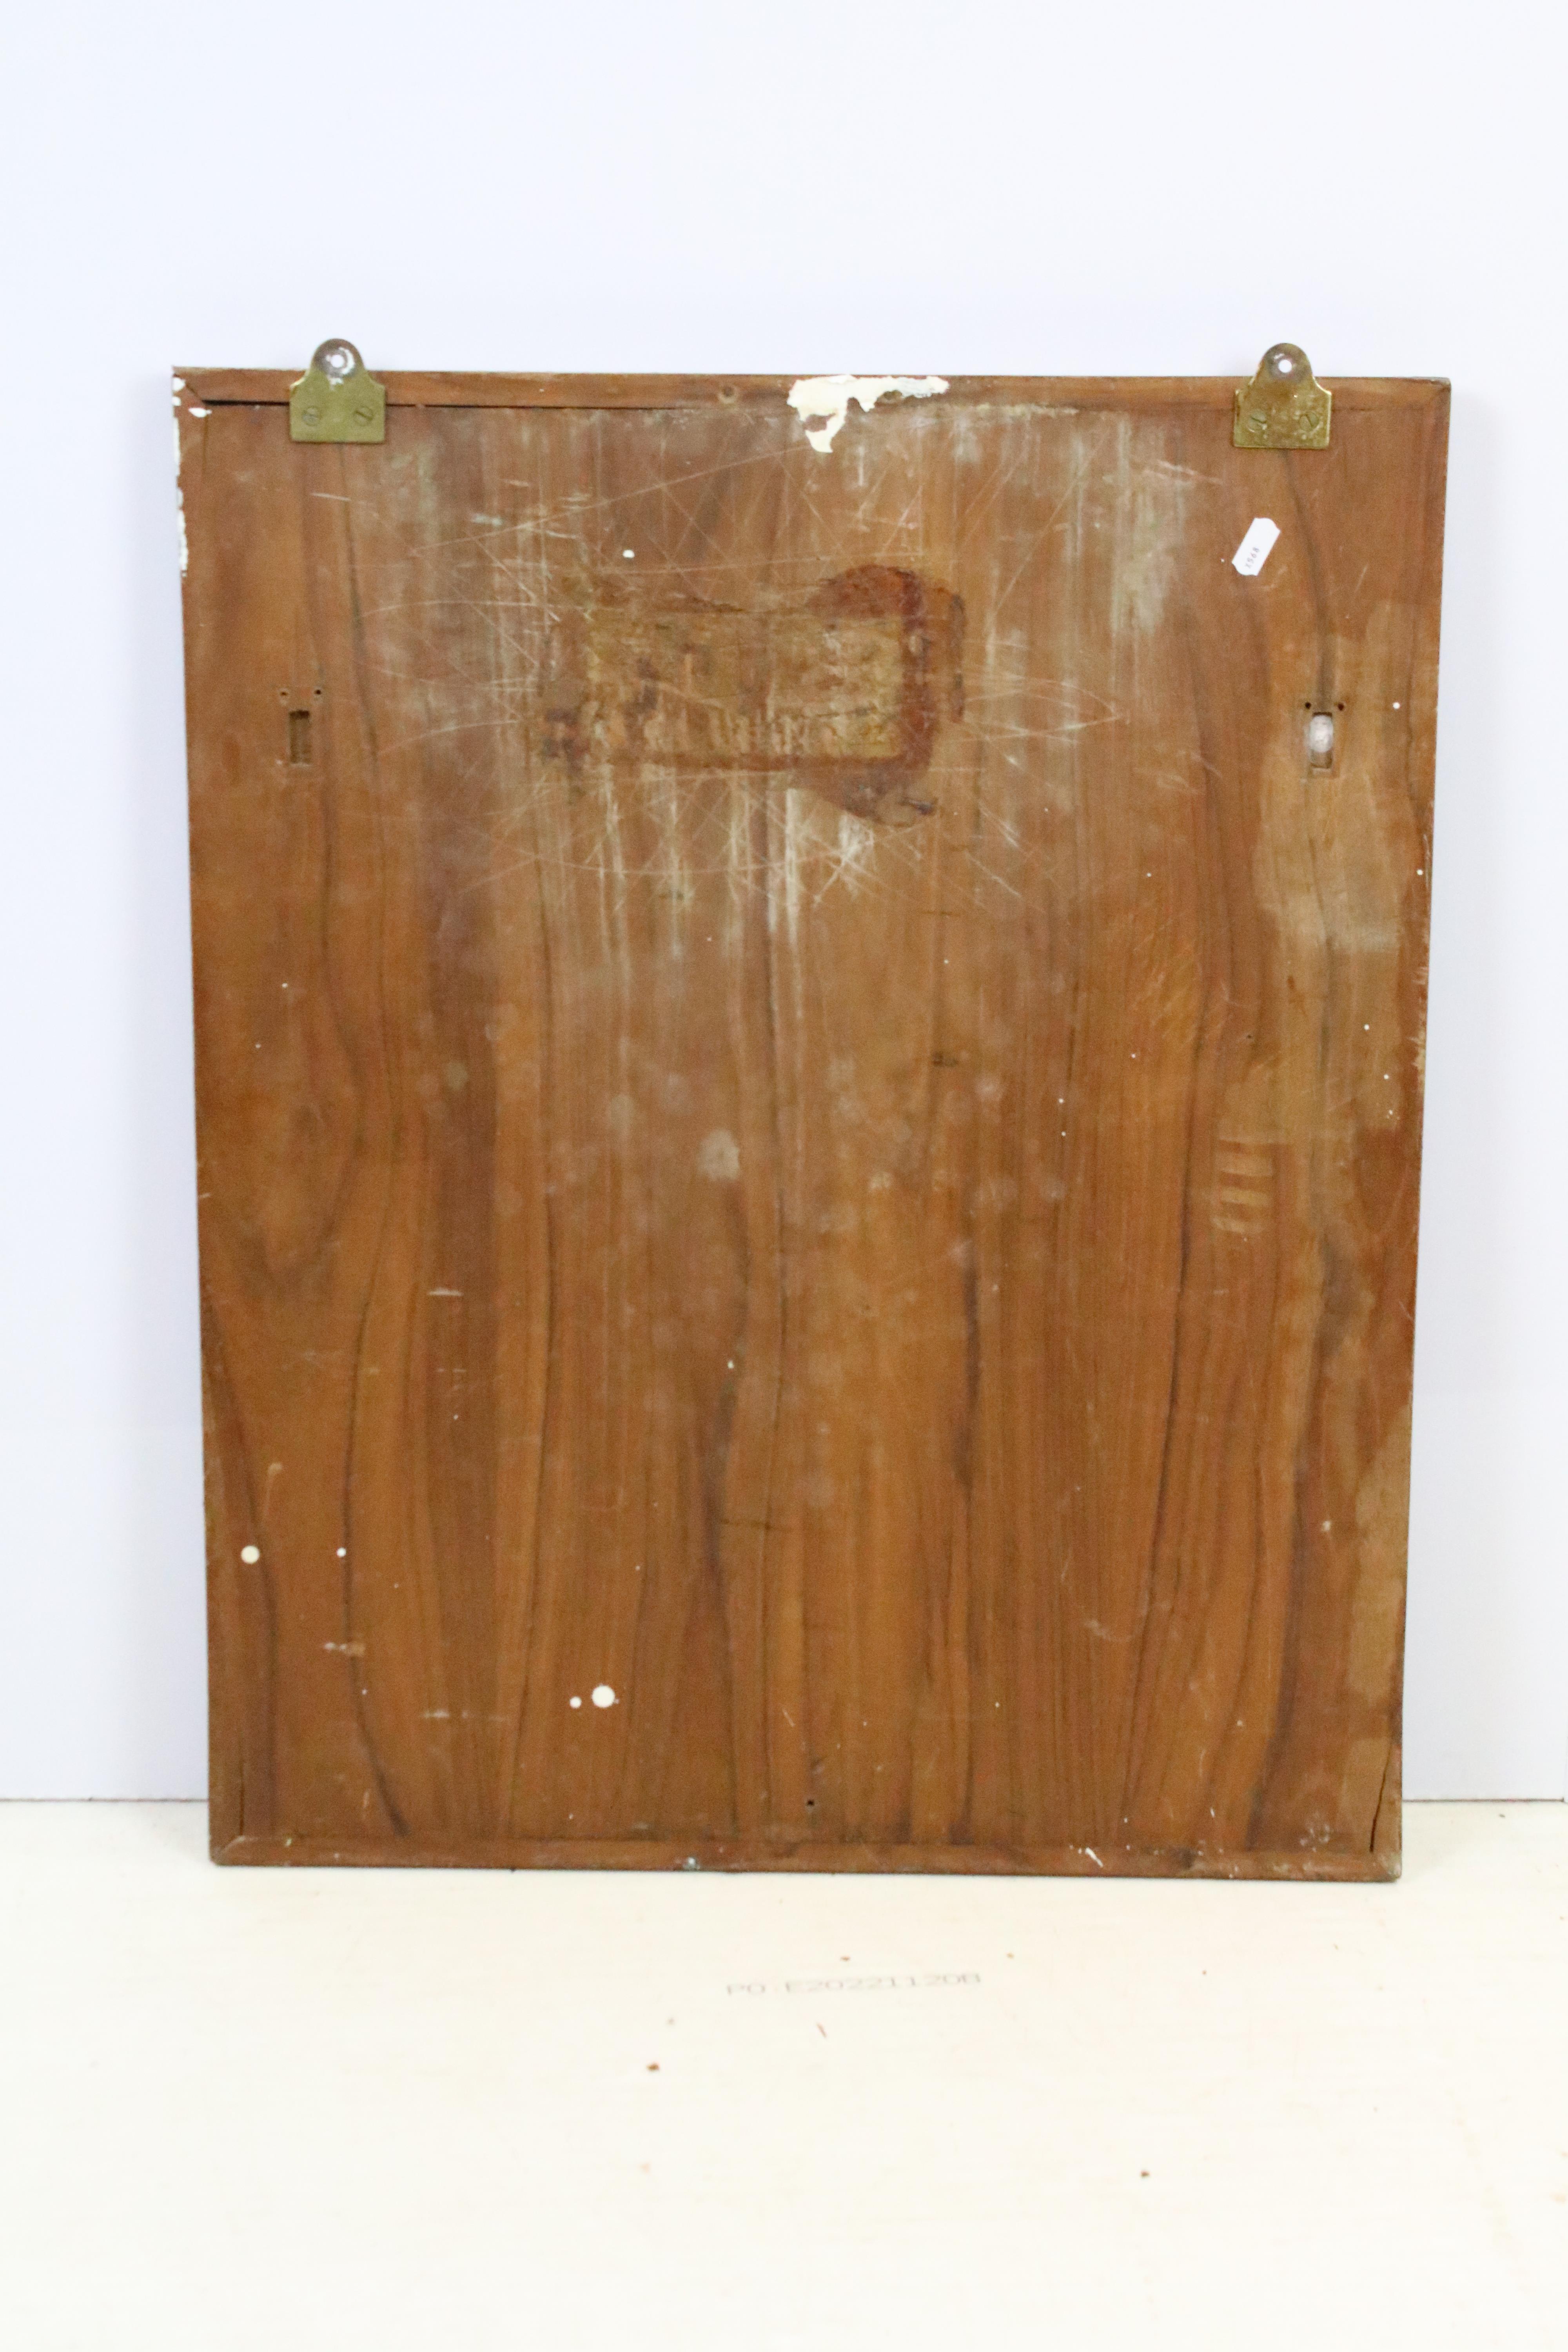 H M Dockyard Singapore 1930s commodore board with painted lettering. Measures 69 x 56cm. - Image 4 of 4